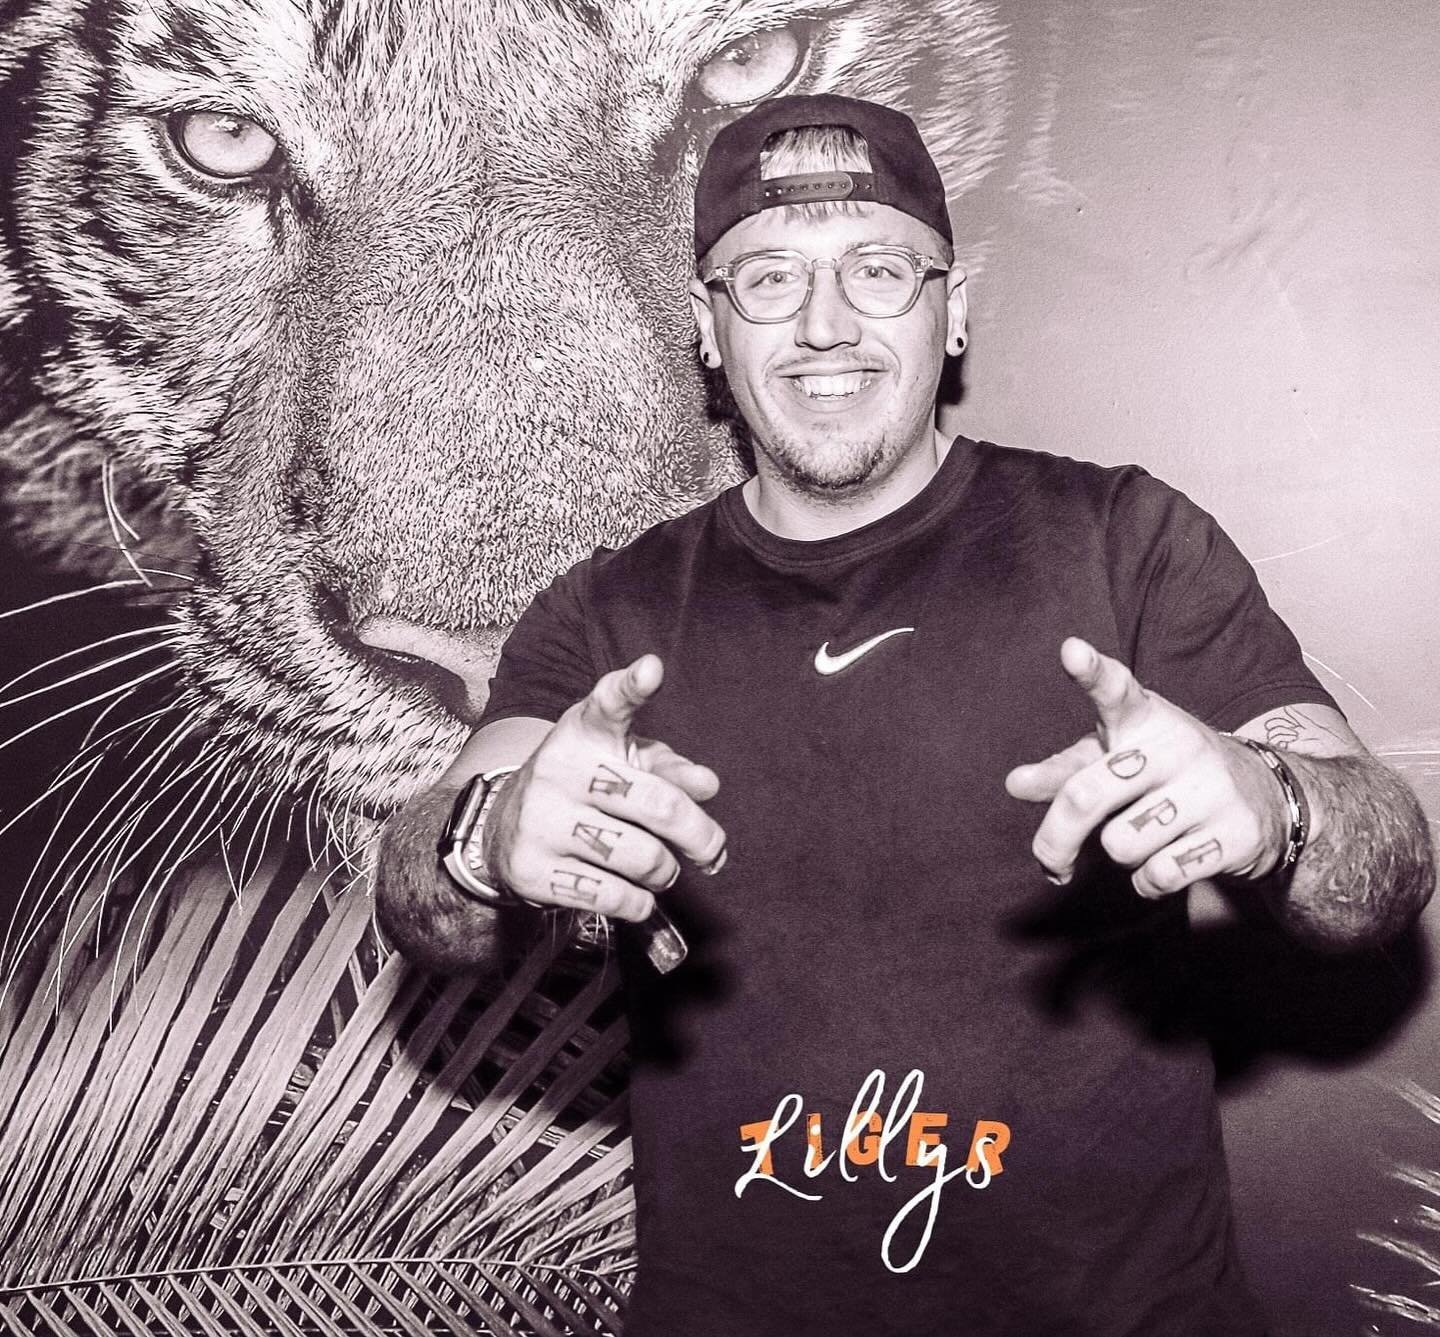 𝘿𝙮𝙡𝙖𝙣 
Back with an almighty 𝗥𝗢𝗔𝗥 🐅 
This Saturday from 10pm!!
1 1 🐯 0 5 🐯 2 4
21+ | &pound;10 
Check out his new #music 🎧